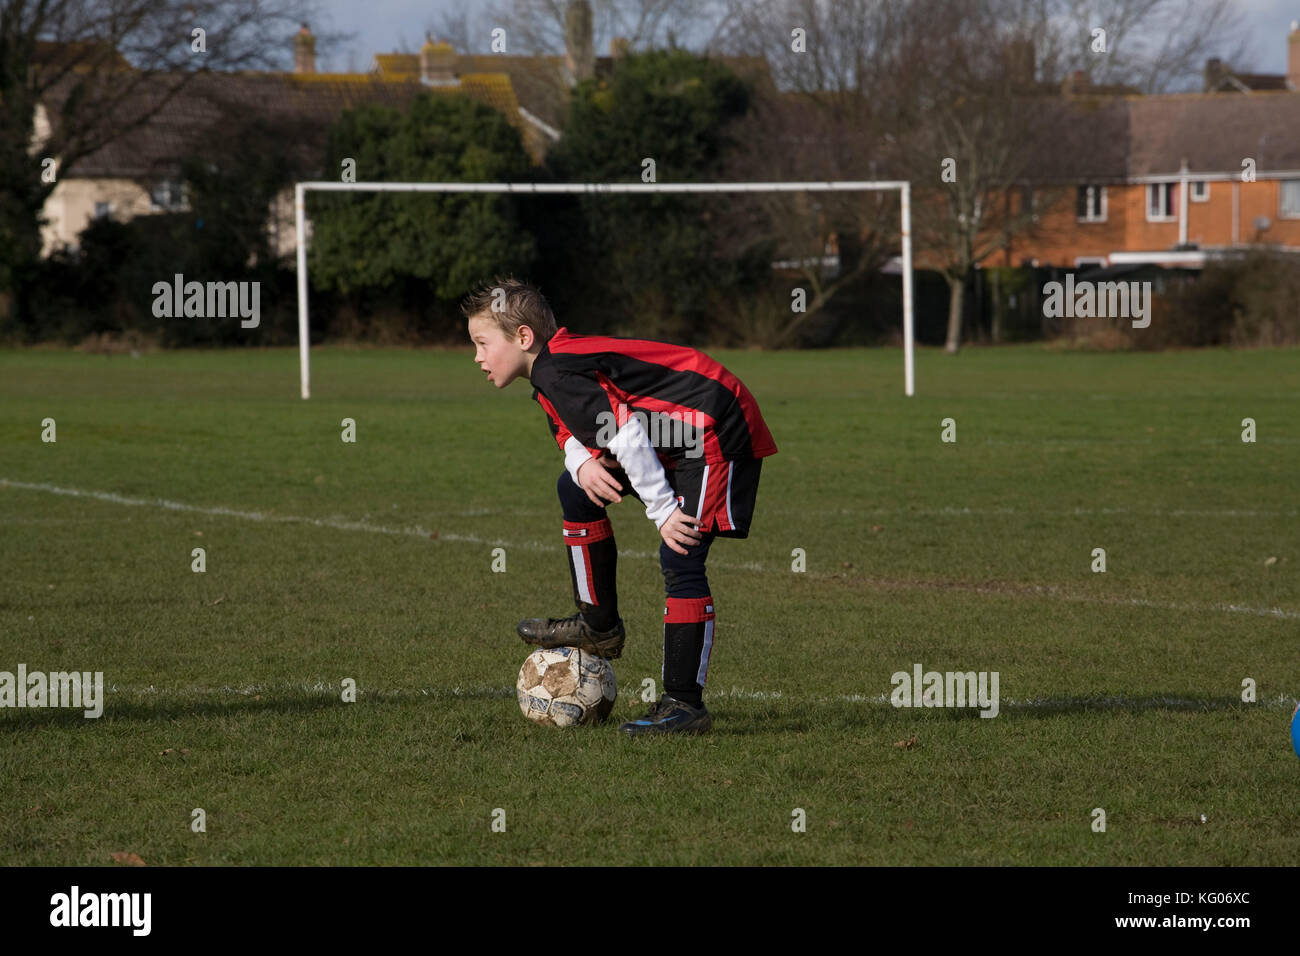 A boy wearing an AFC Bournemouth replica kit rests during a soccer training session. Stock Photo